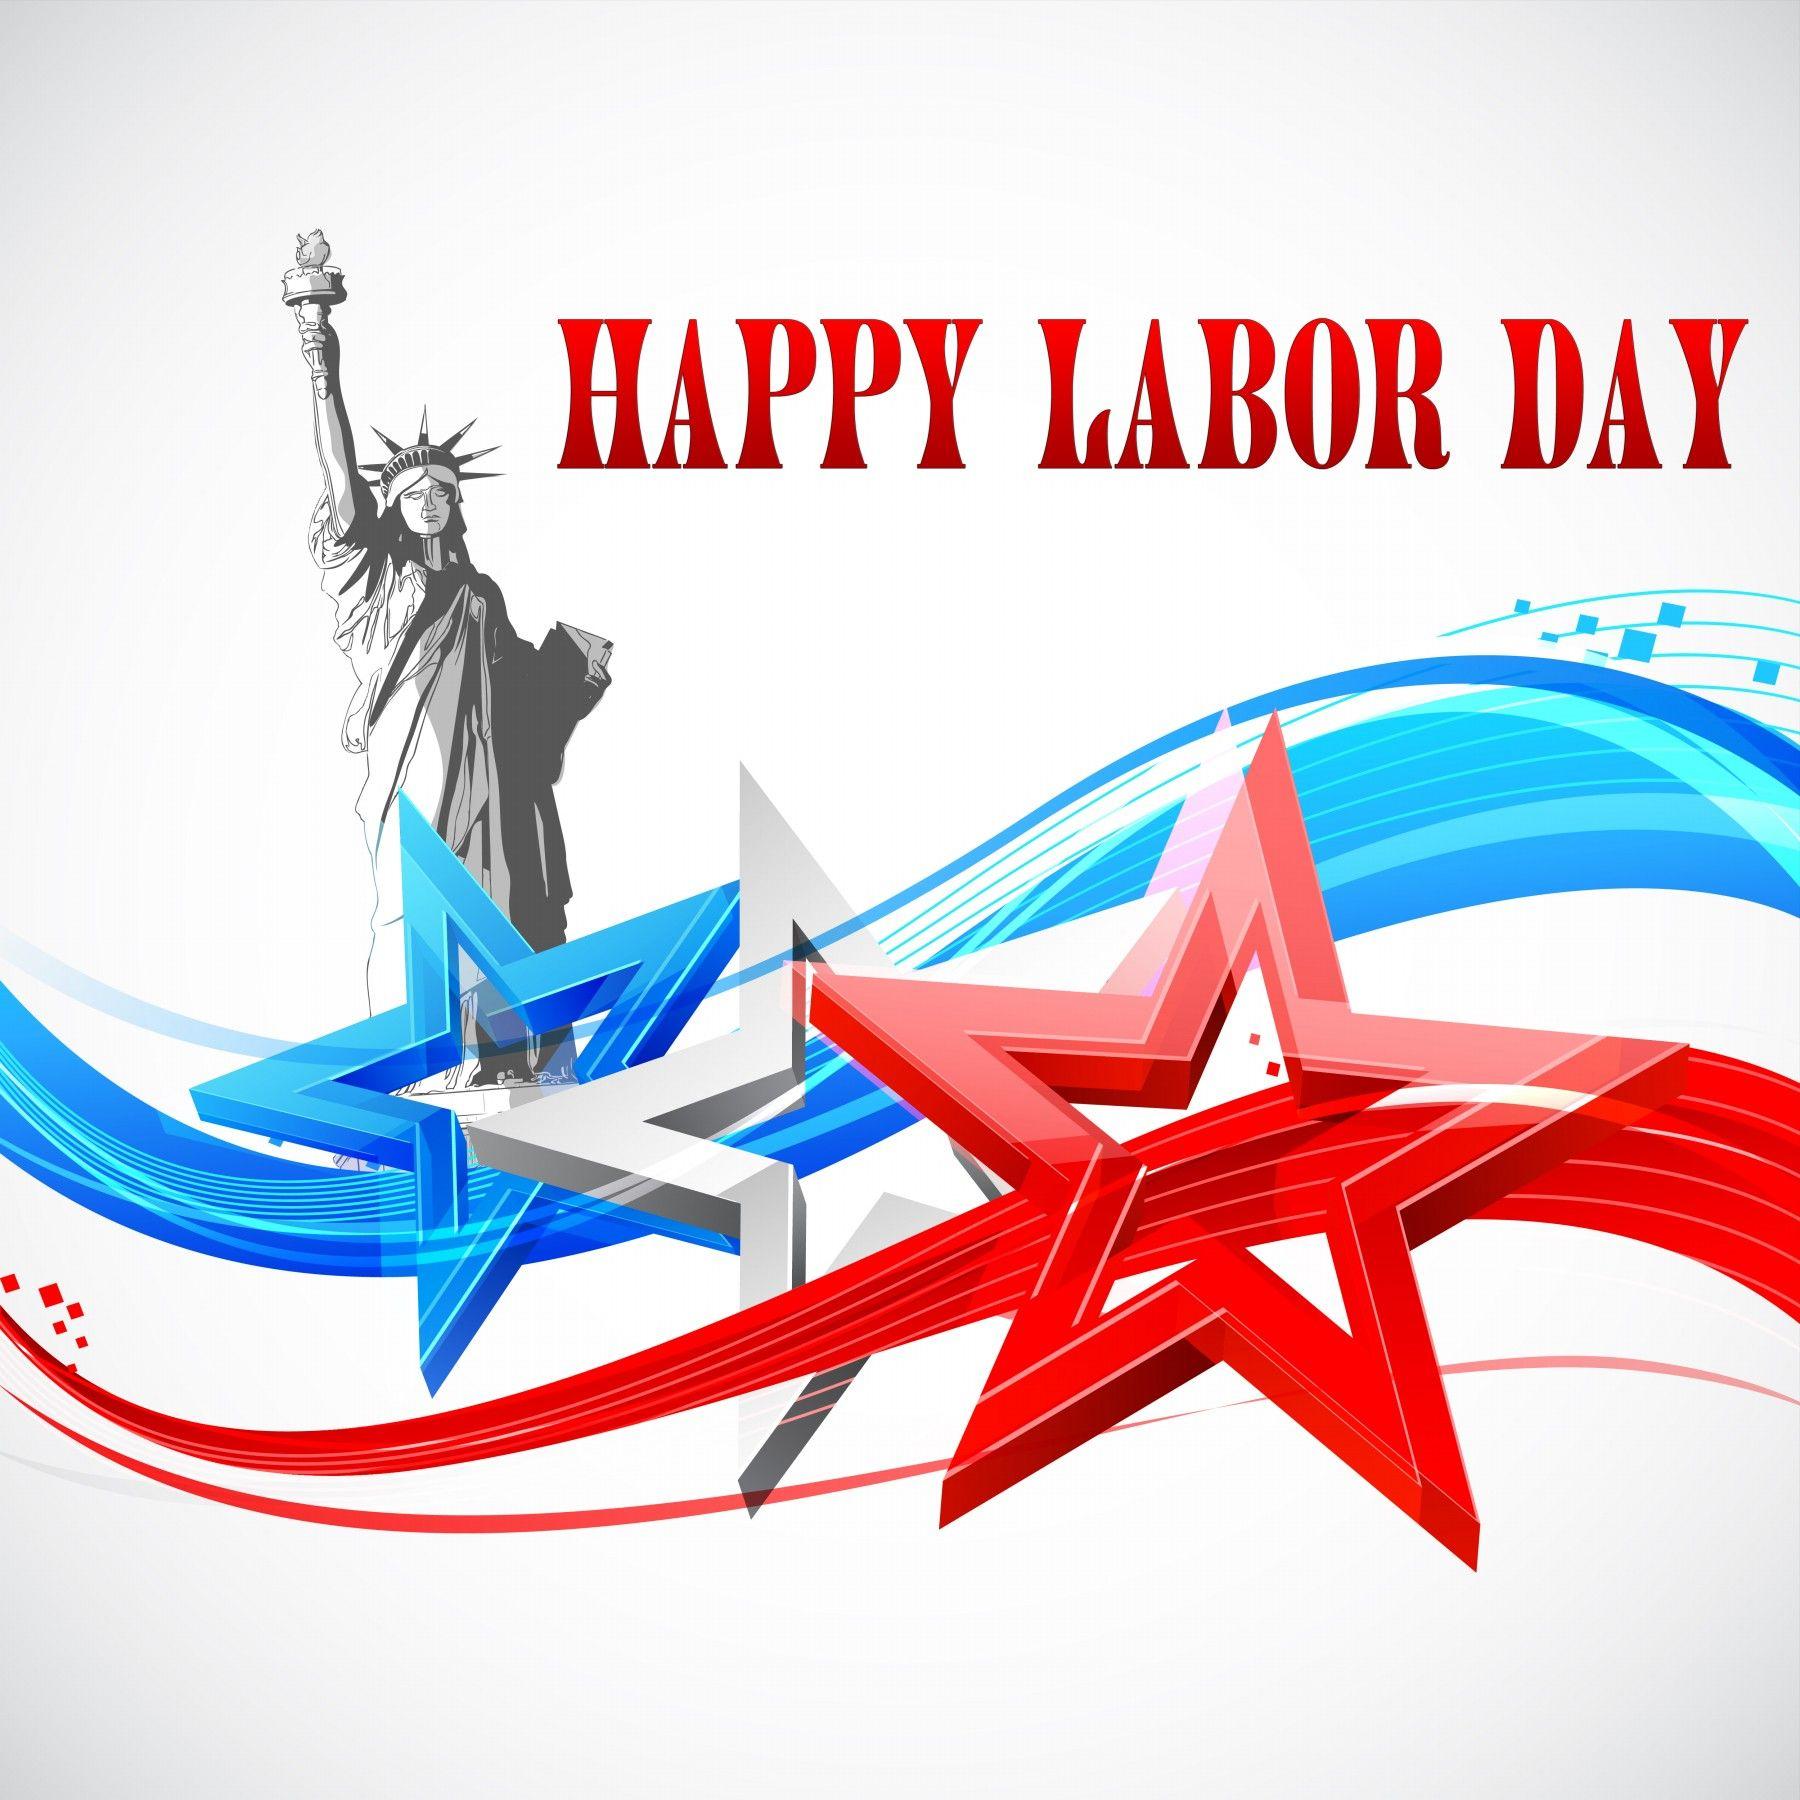 Free download Happy Labor Day Wallpaper [1800x1800] for your Desktop, Mobile & Tablet. Explore Labor Day Wallpaper. Happy Labor Day Wallpaper, Free Labor Day Wallpaper, Labor Day Wallpaper